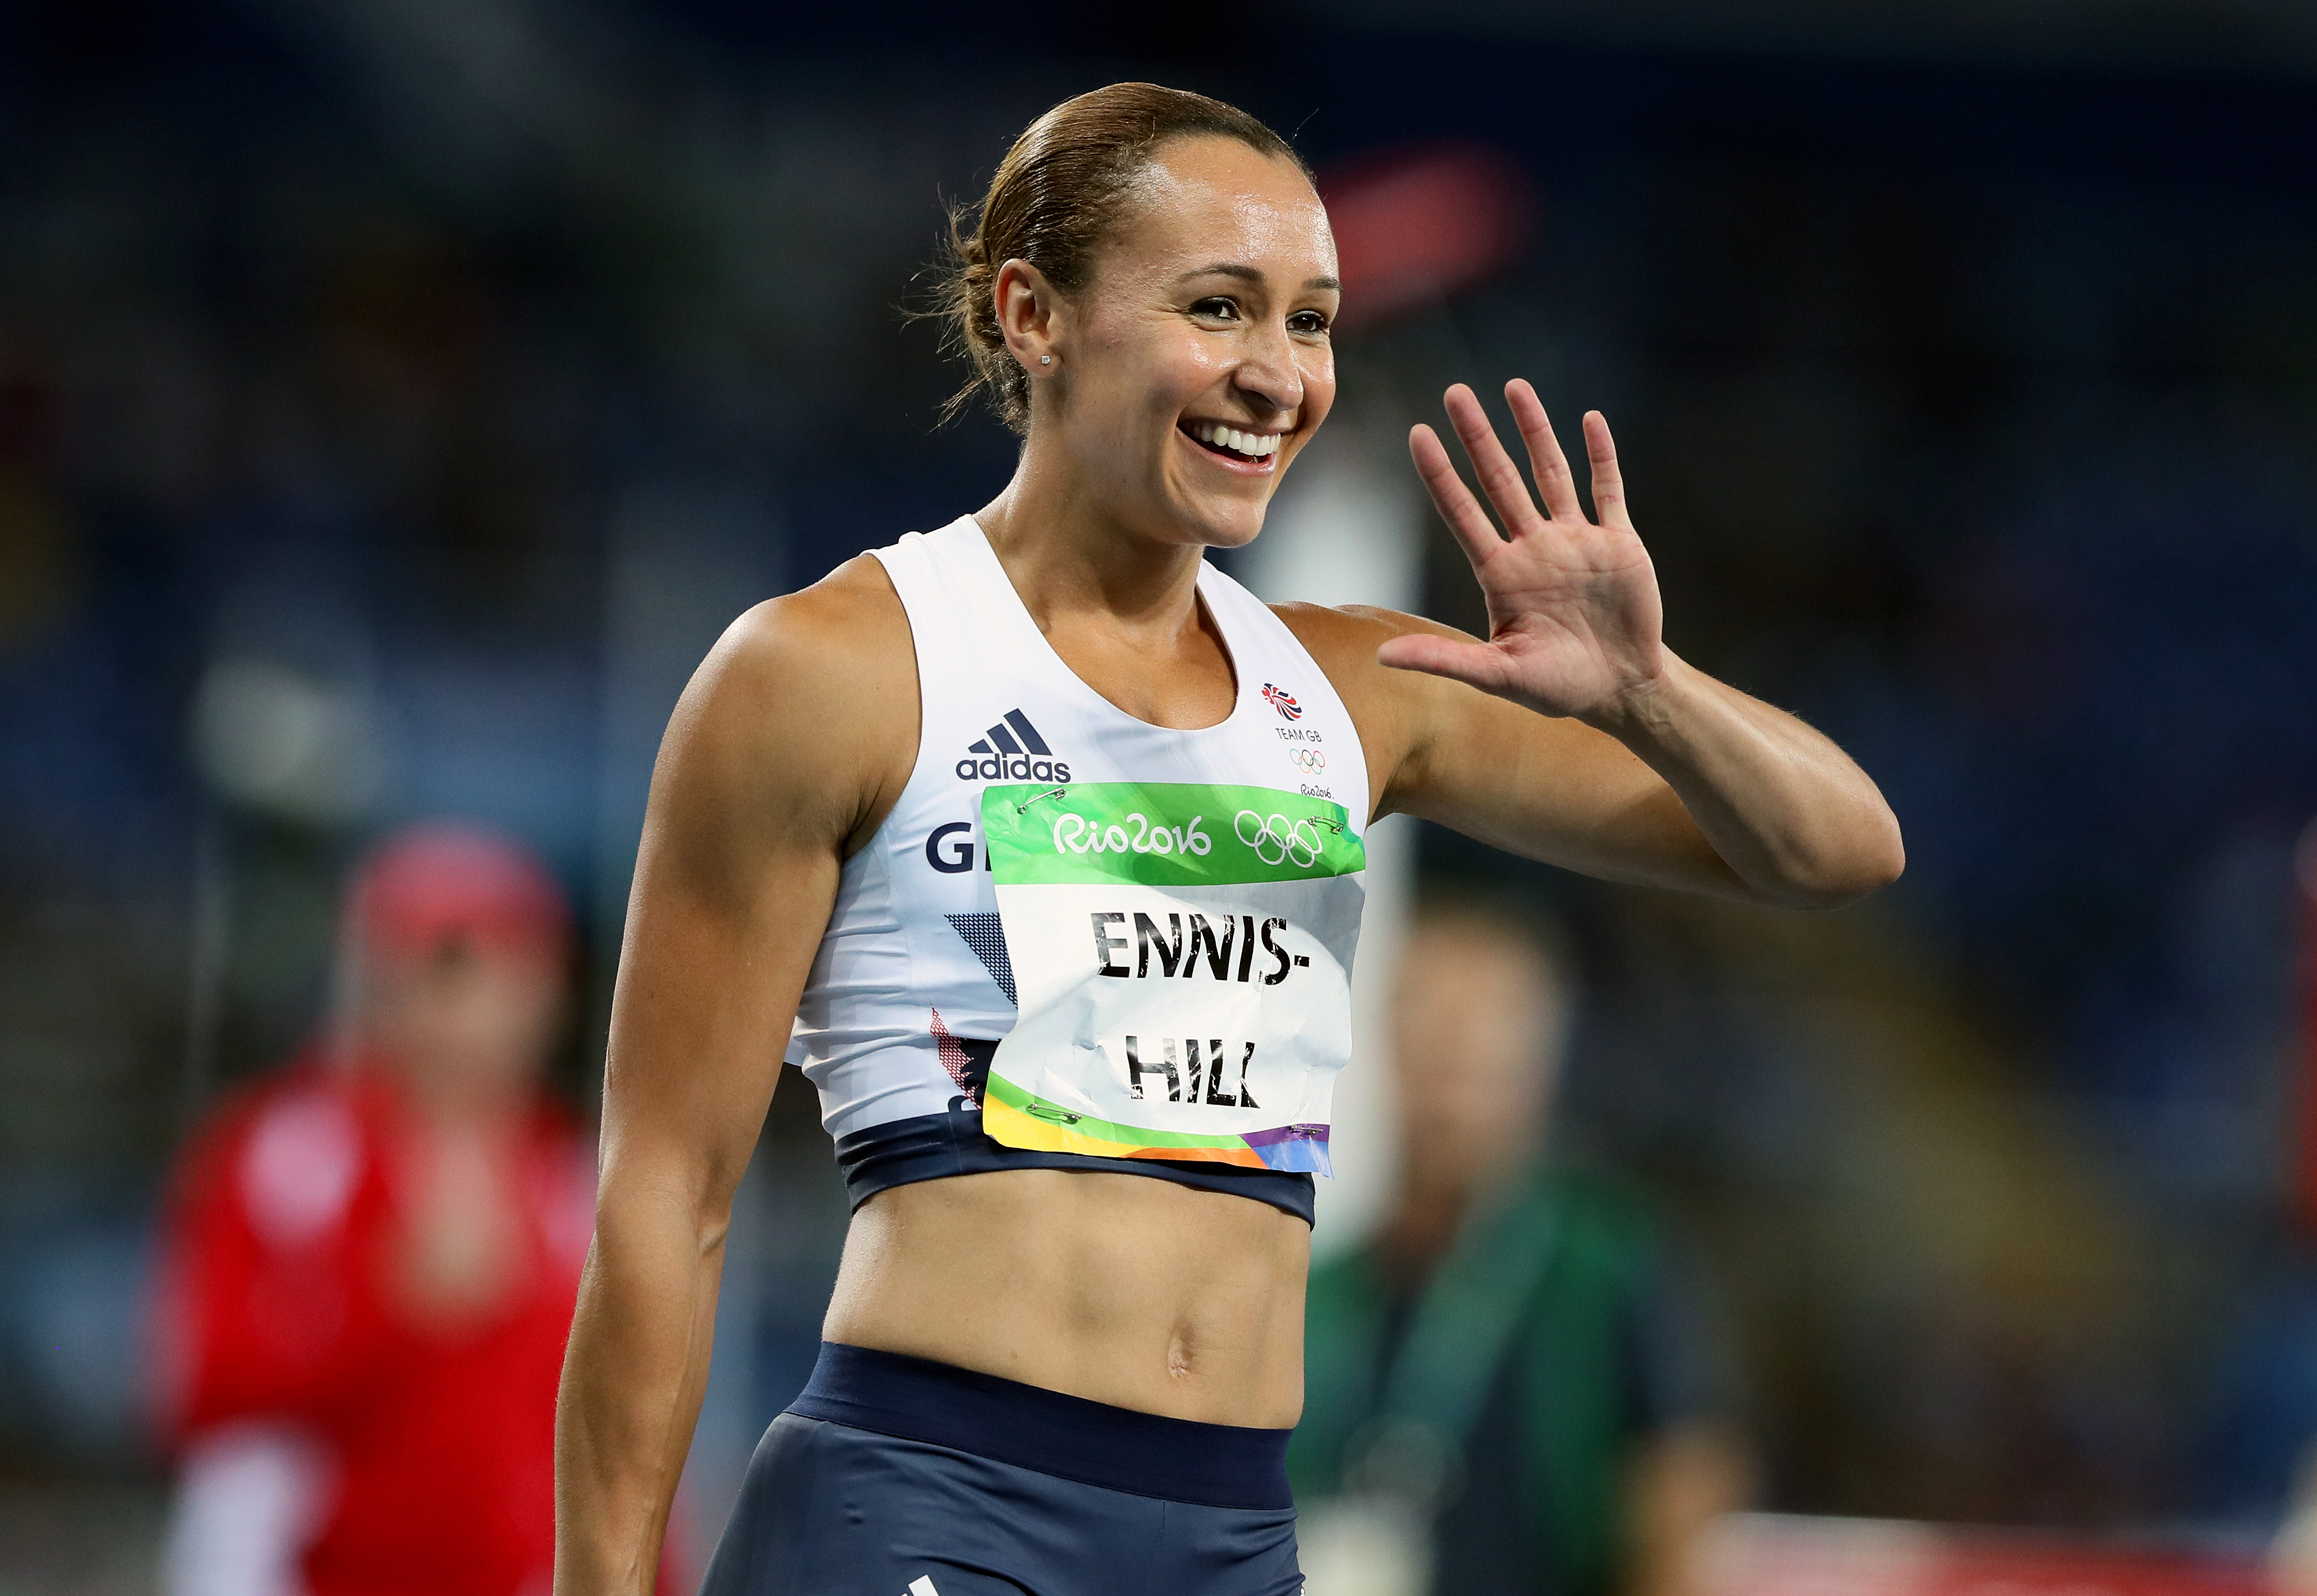 Jess ennis-hill competing at the rio olympics